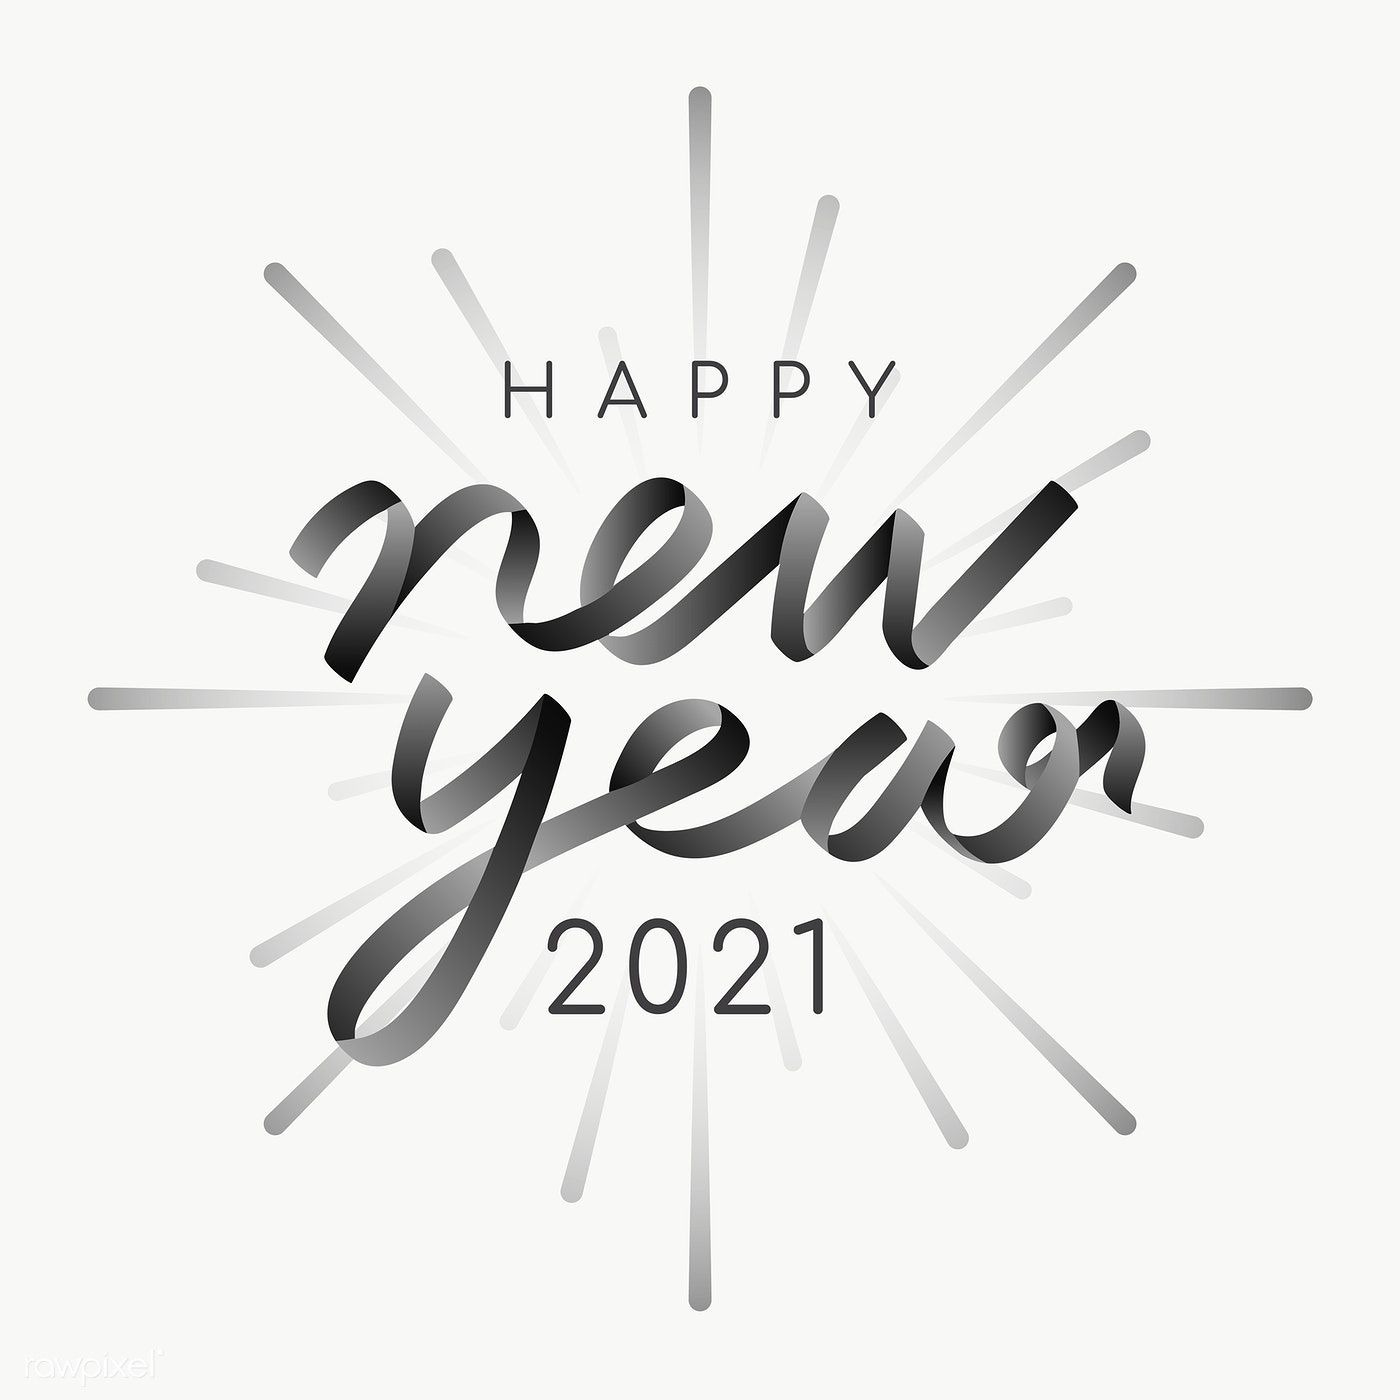 Happy New Year 2021 transparent png. free image / NingZk V. New year card design, Happy new year picture, Happy new year fireworks